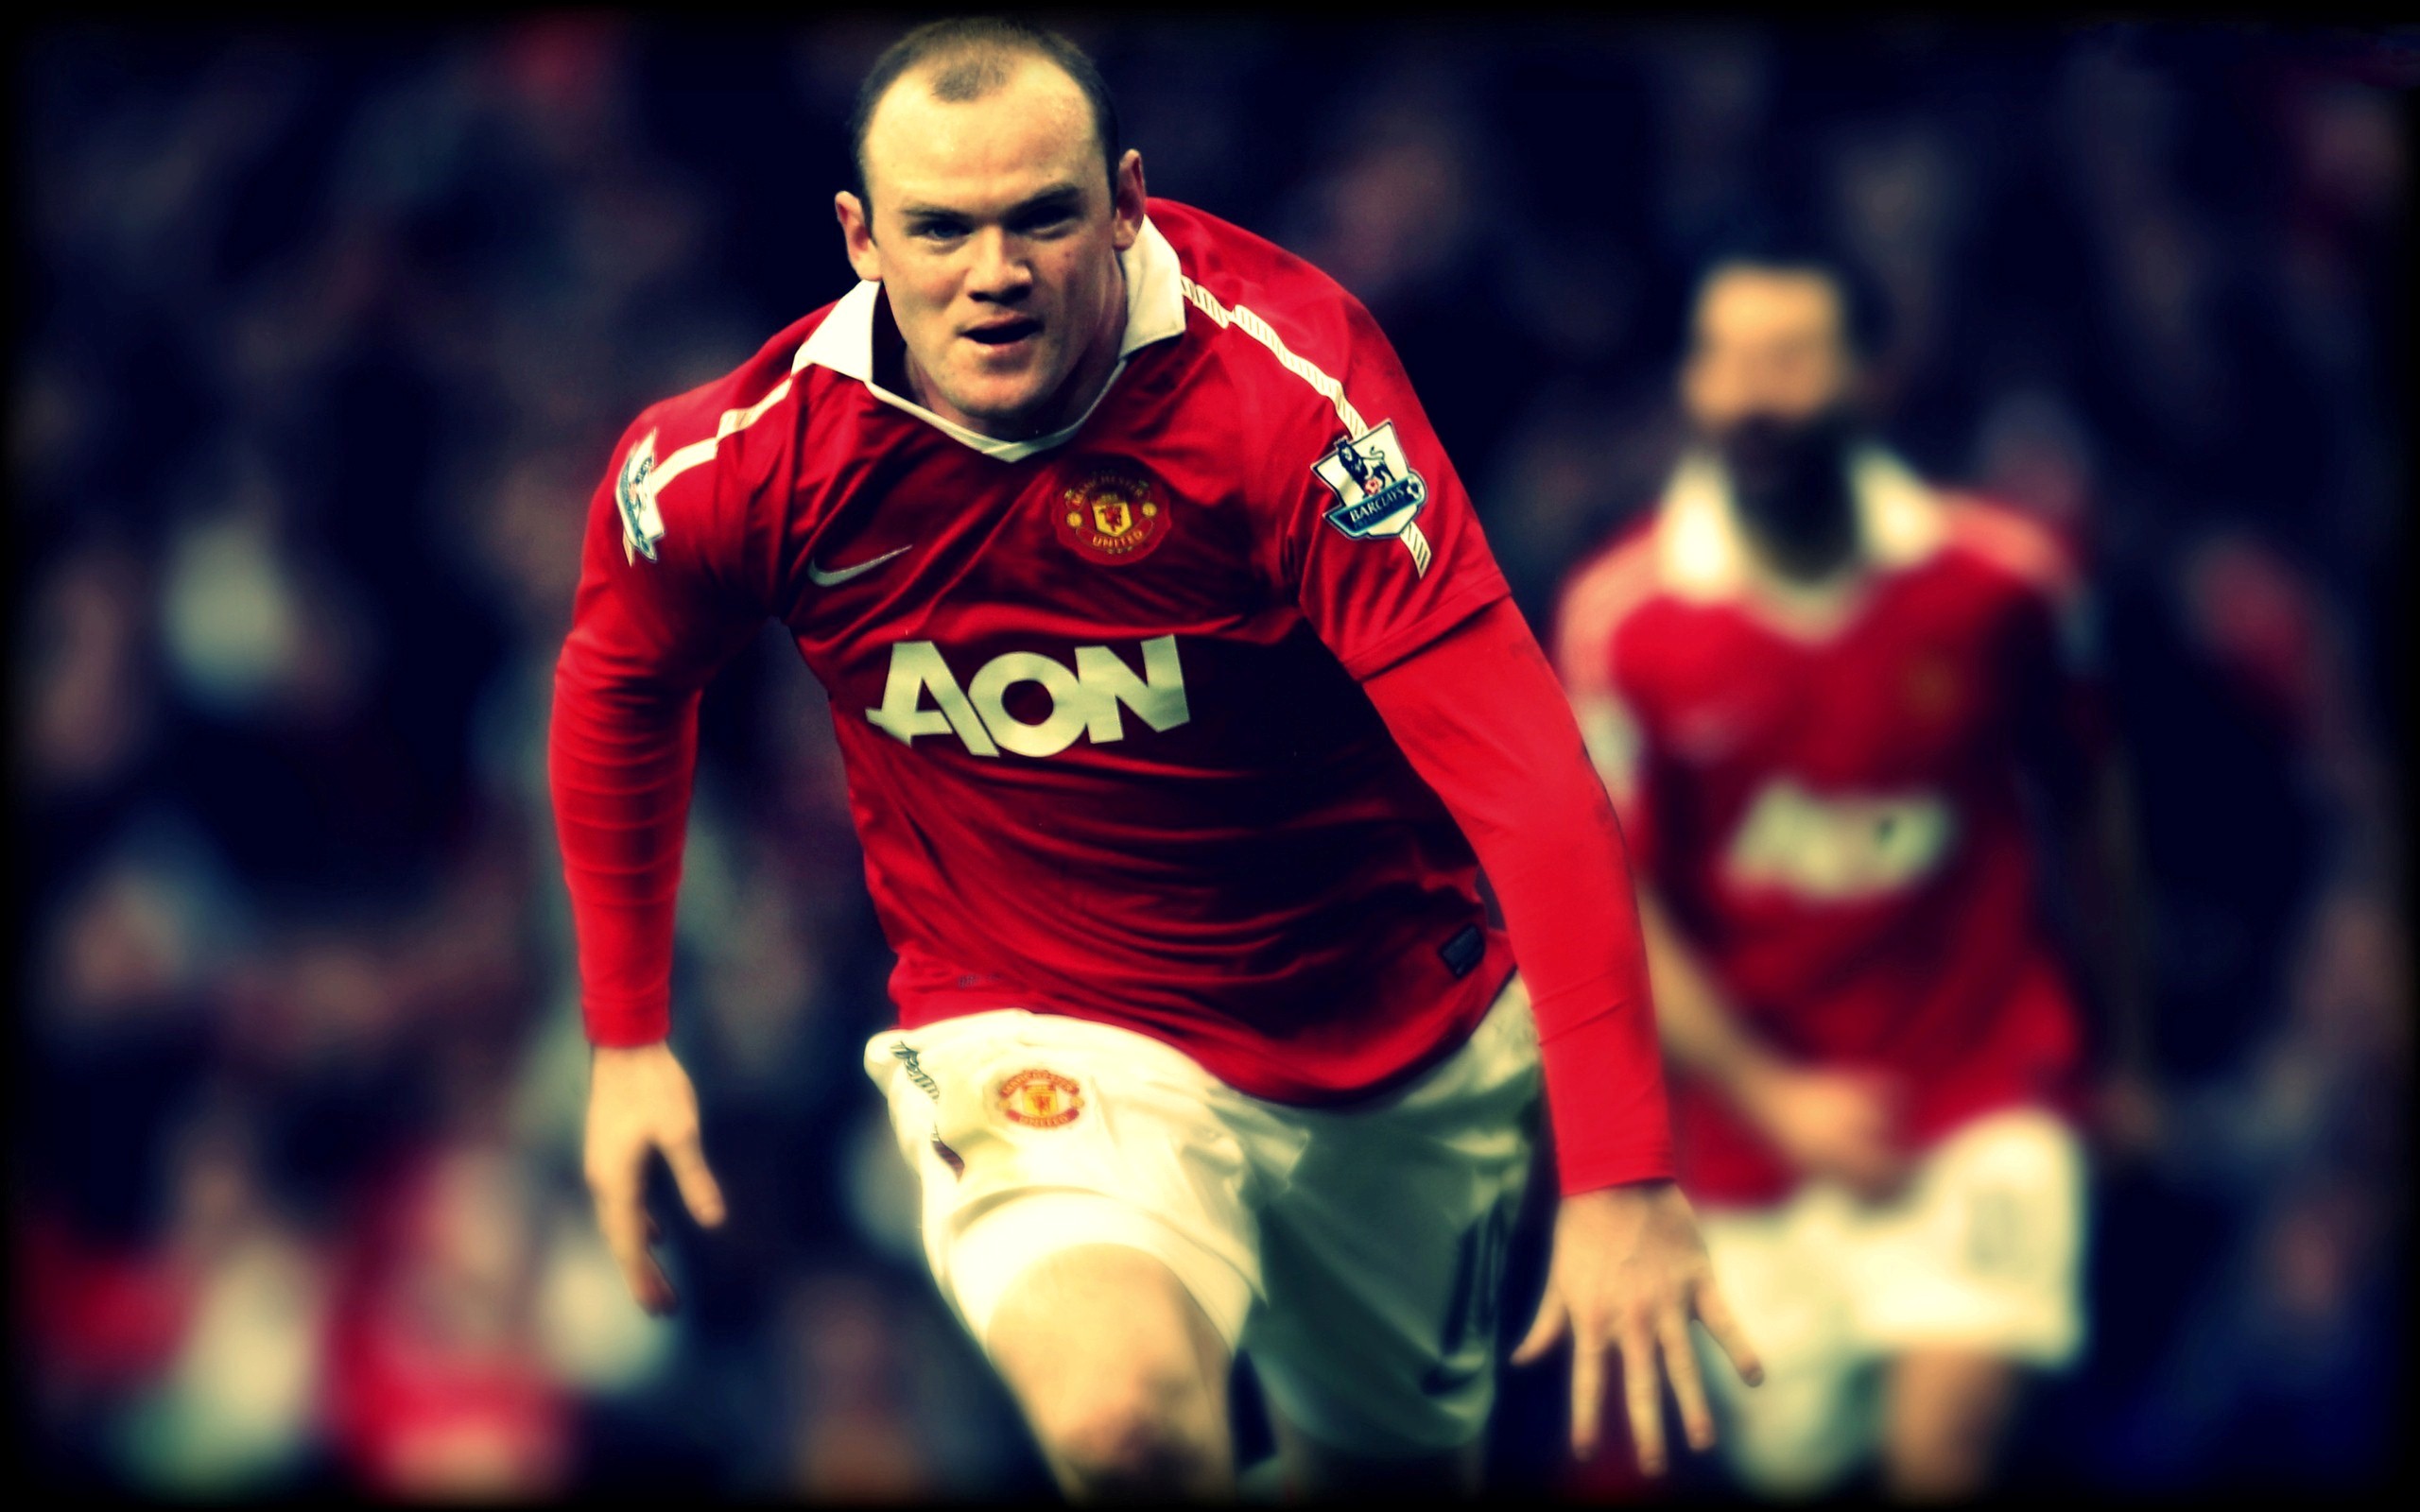 Free download Wayne Rooney Football Player HD Wallpaper [2560x1600] for your Desktop, Mobile & Tablet. Explore Football Players Wallpaper. Sick Football Wallpaper, NFL Football Players Wallpaper, Football HD Wallpaper